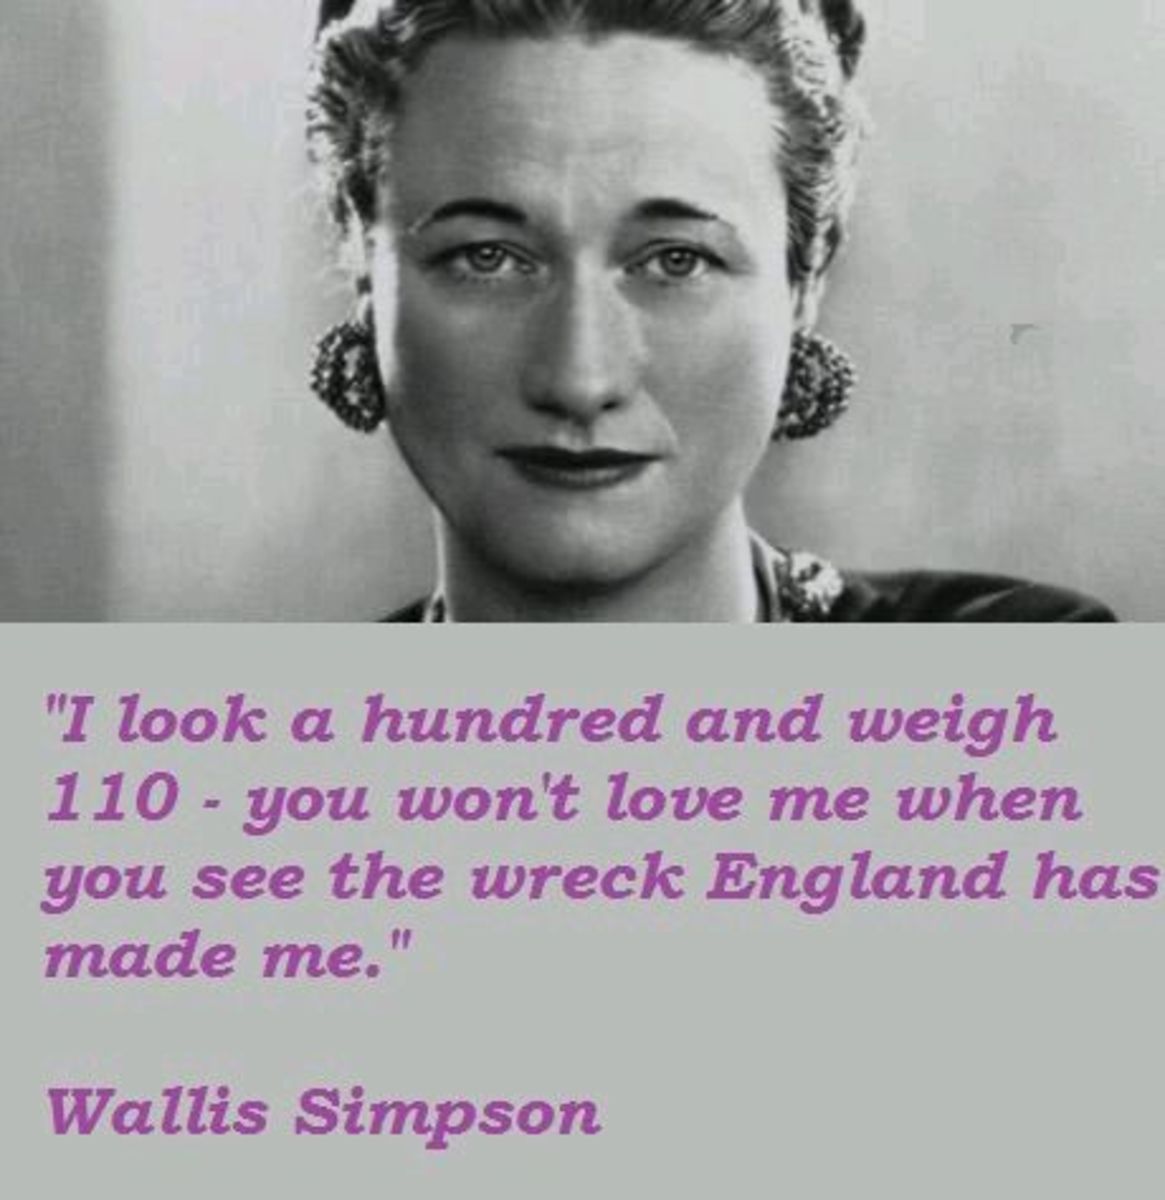 king-edward-viii-and-aspergers-syndrome-or-wallis-simpson-and-narcissistic-personality-disorder